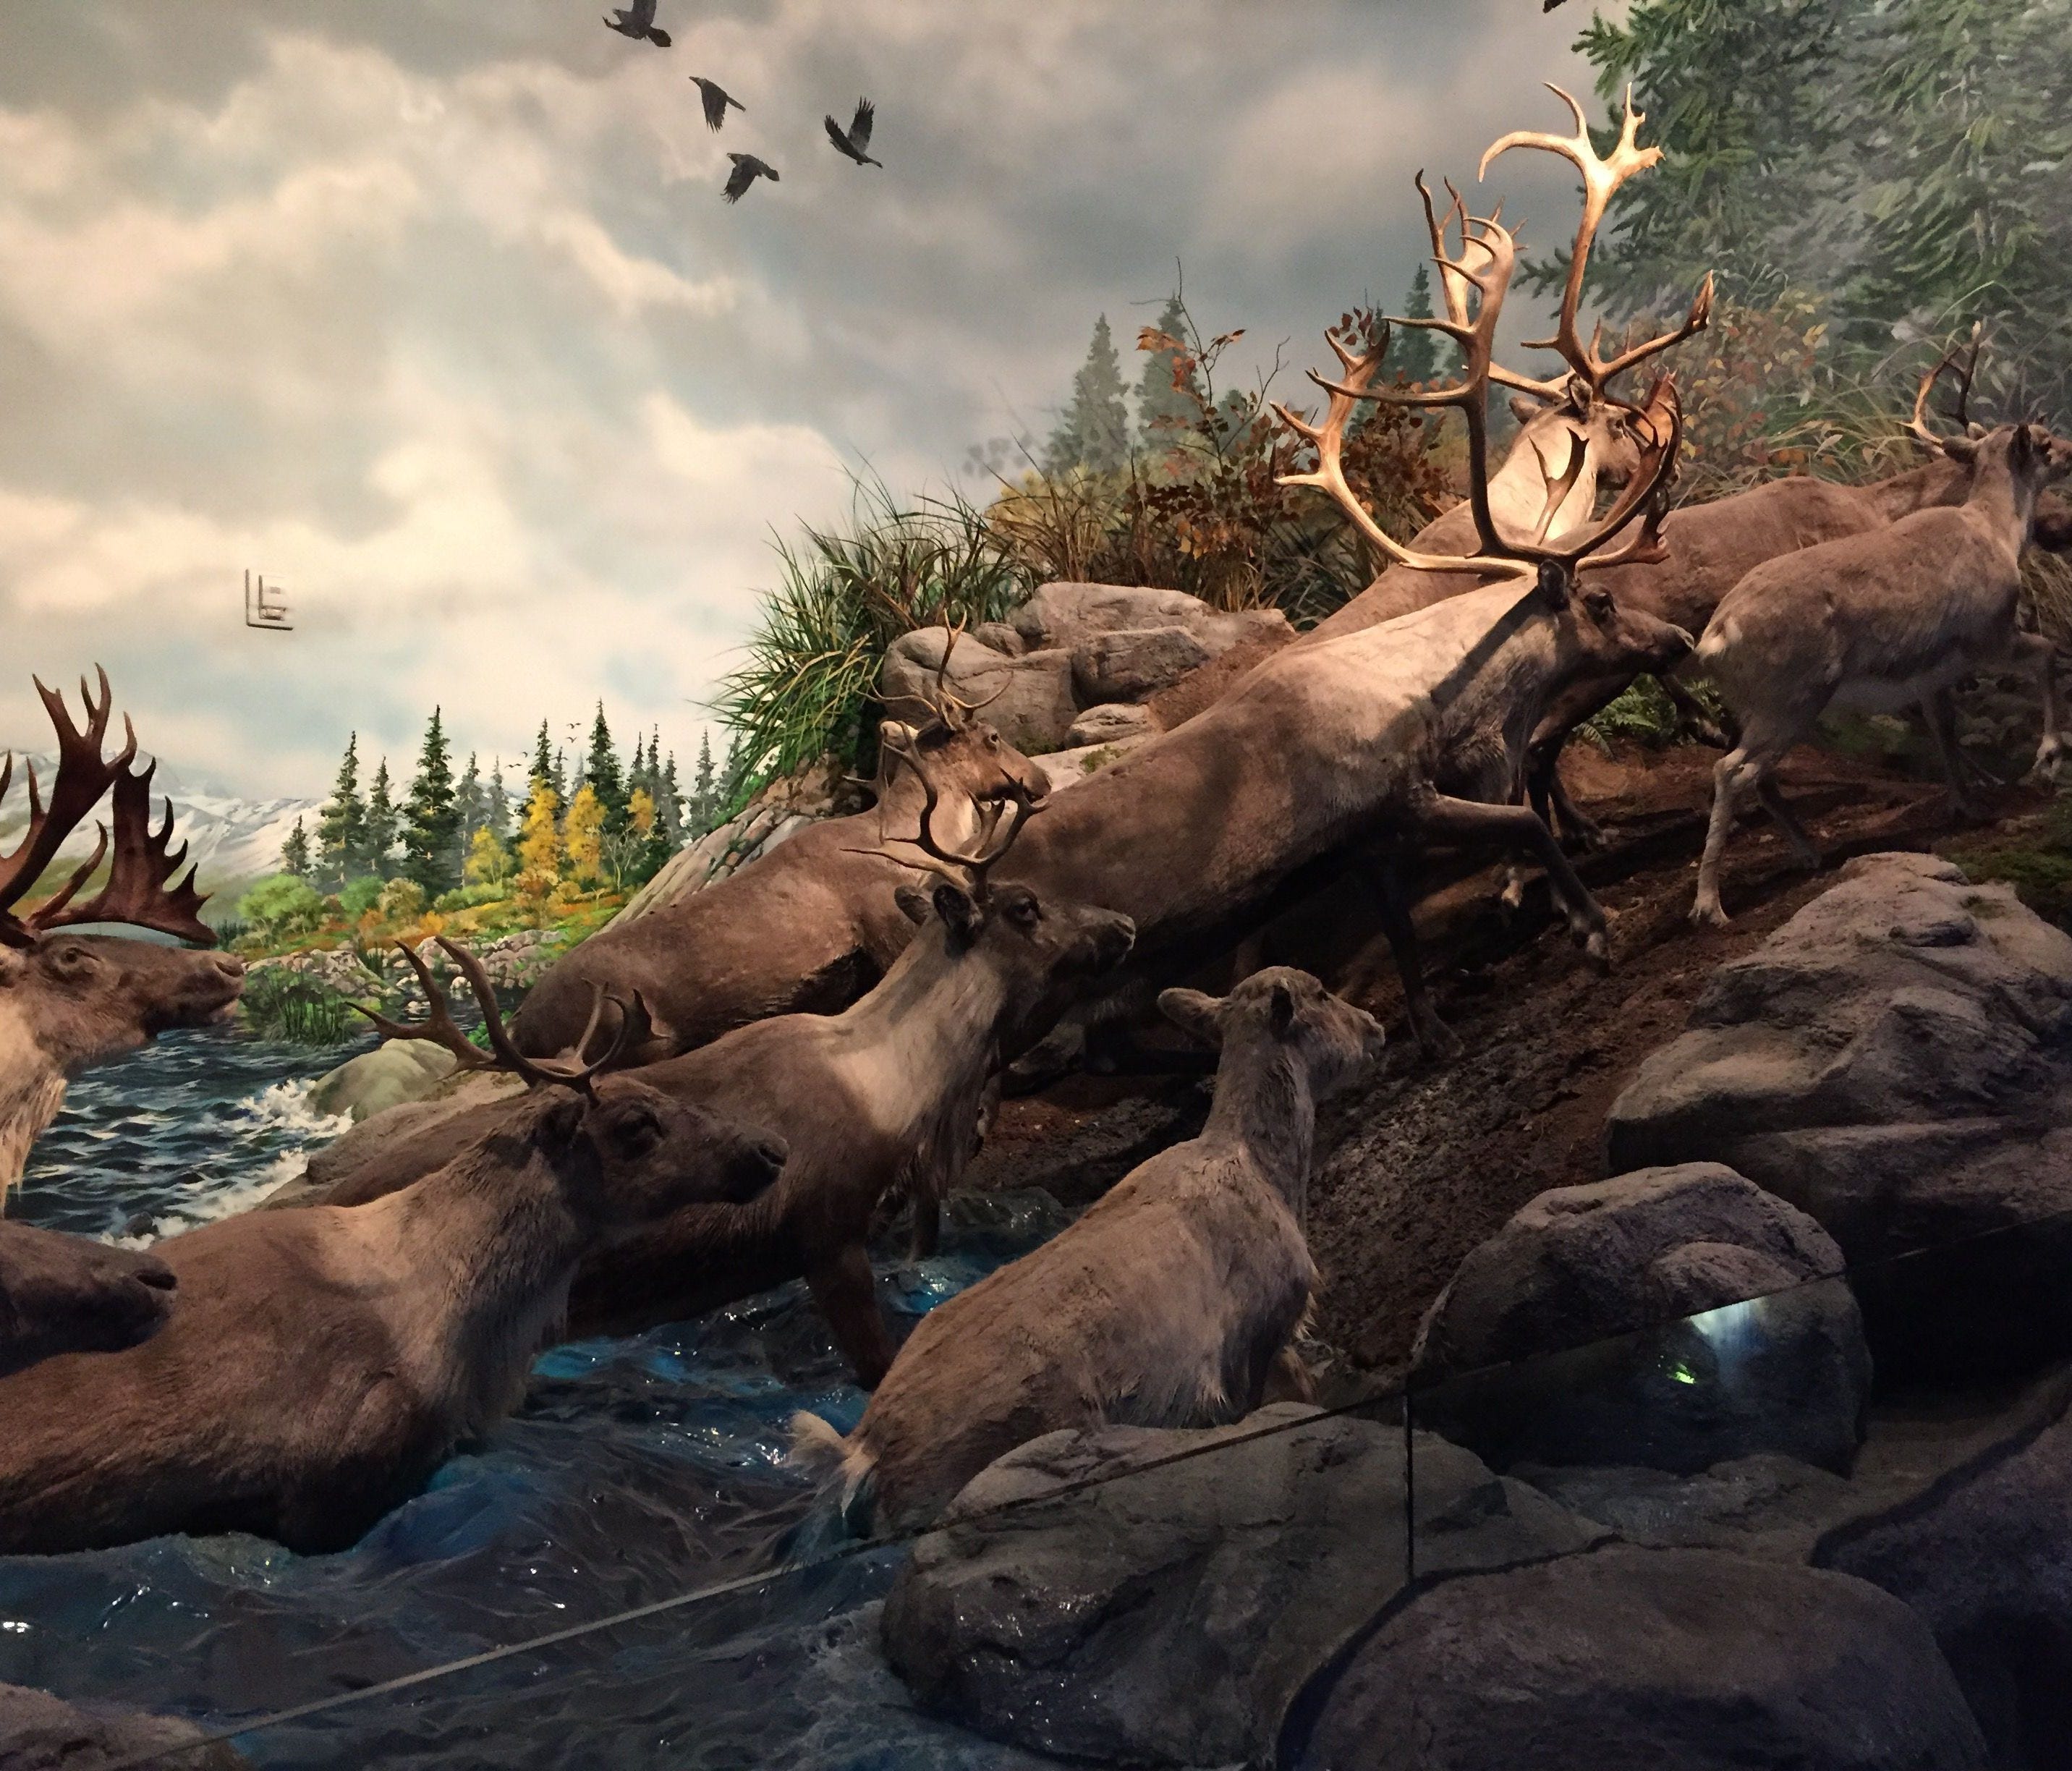 A caribou diorama at Wonders of Wildlife. Background art in each of the museum's diorama displays was hand-painted.